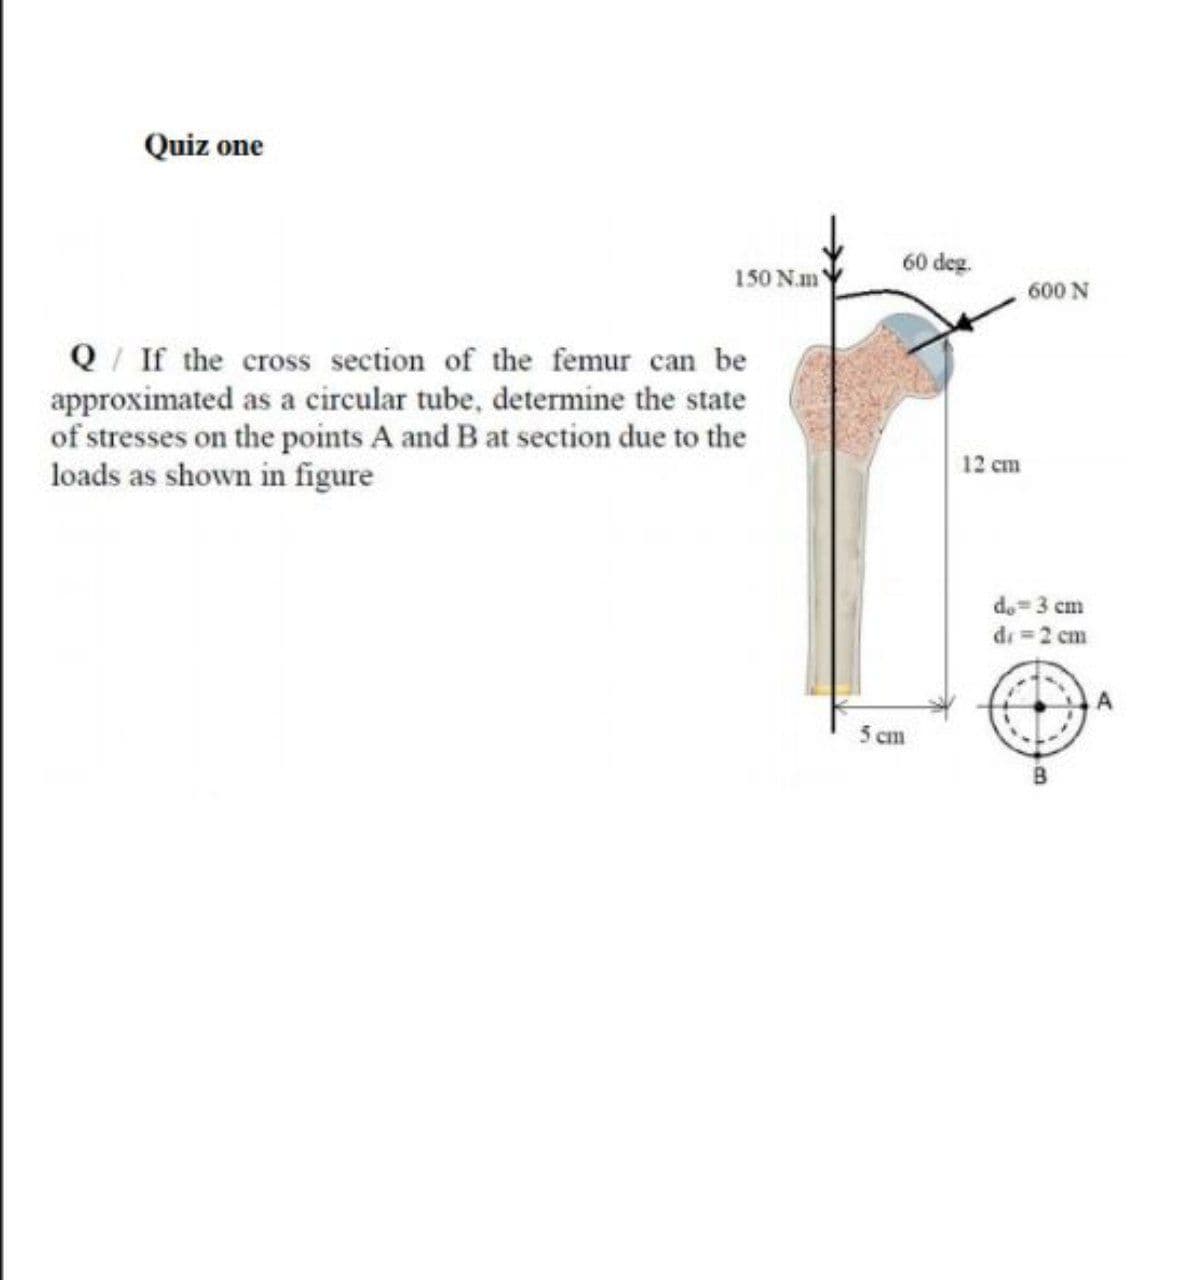 Q/ If the cross section of the femur can be
approximated as a circular tube, determine the state
of stresses on the points A and B at section due to the
loads as shown in figure
